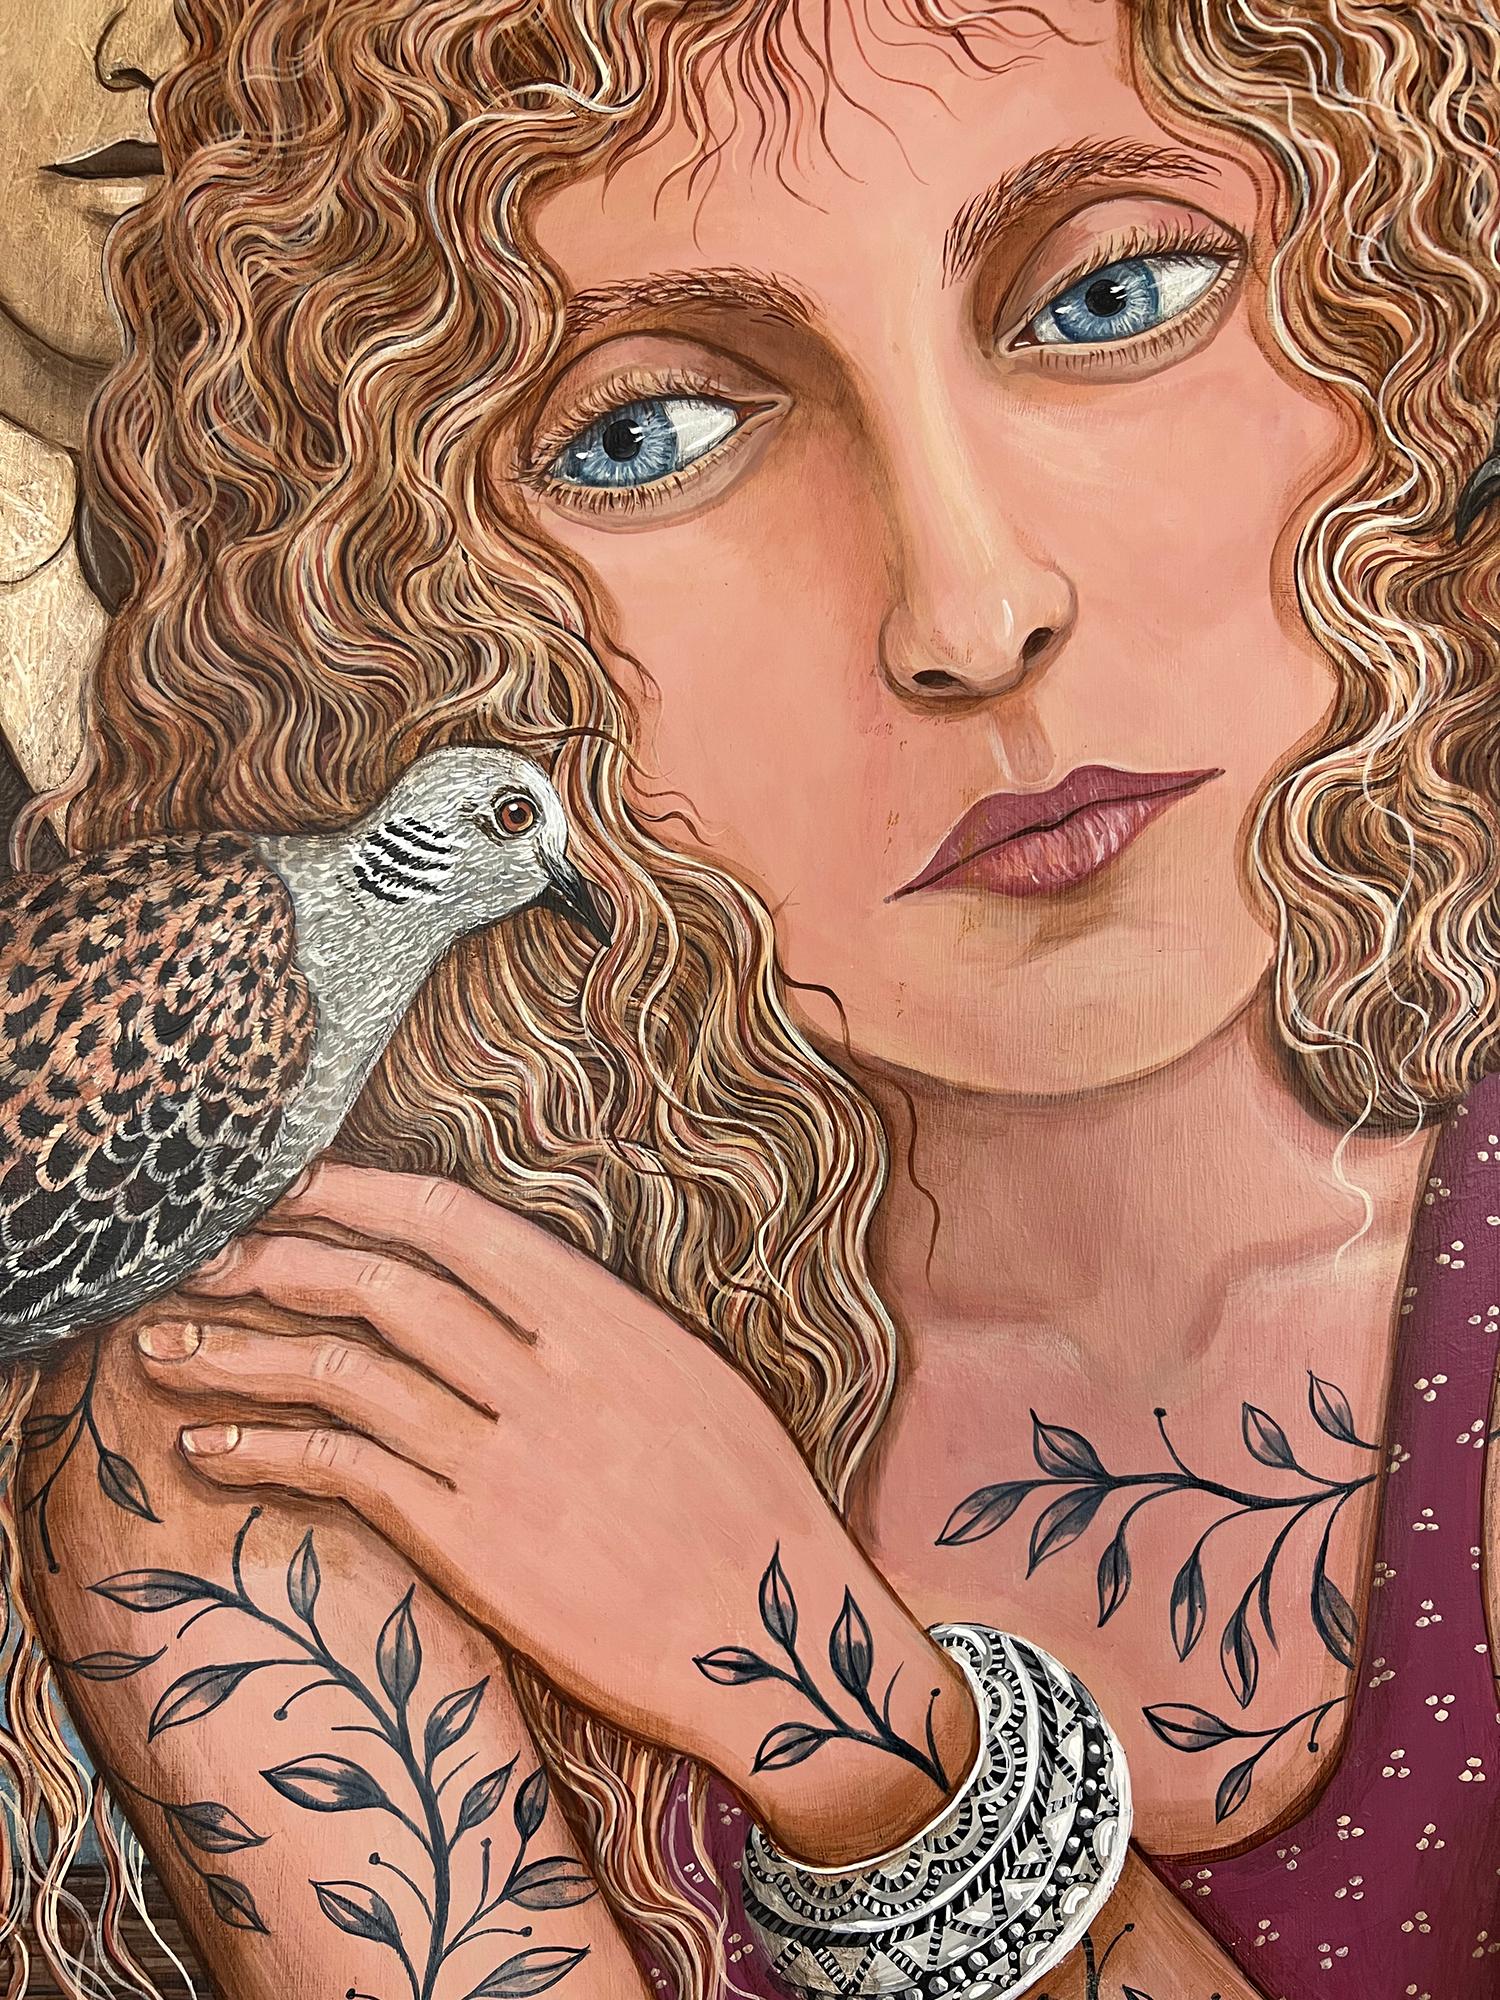 <p>Artist Comments<br>Artist Johansen Newman pictures a contemplative portrait of a woman writing a letter. It raises the question of which of the images on the wall, if any, the note is connected to. Five turtle doves surround her - a symbol of